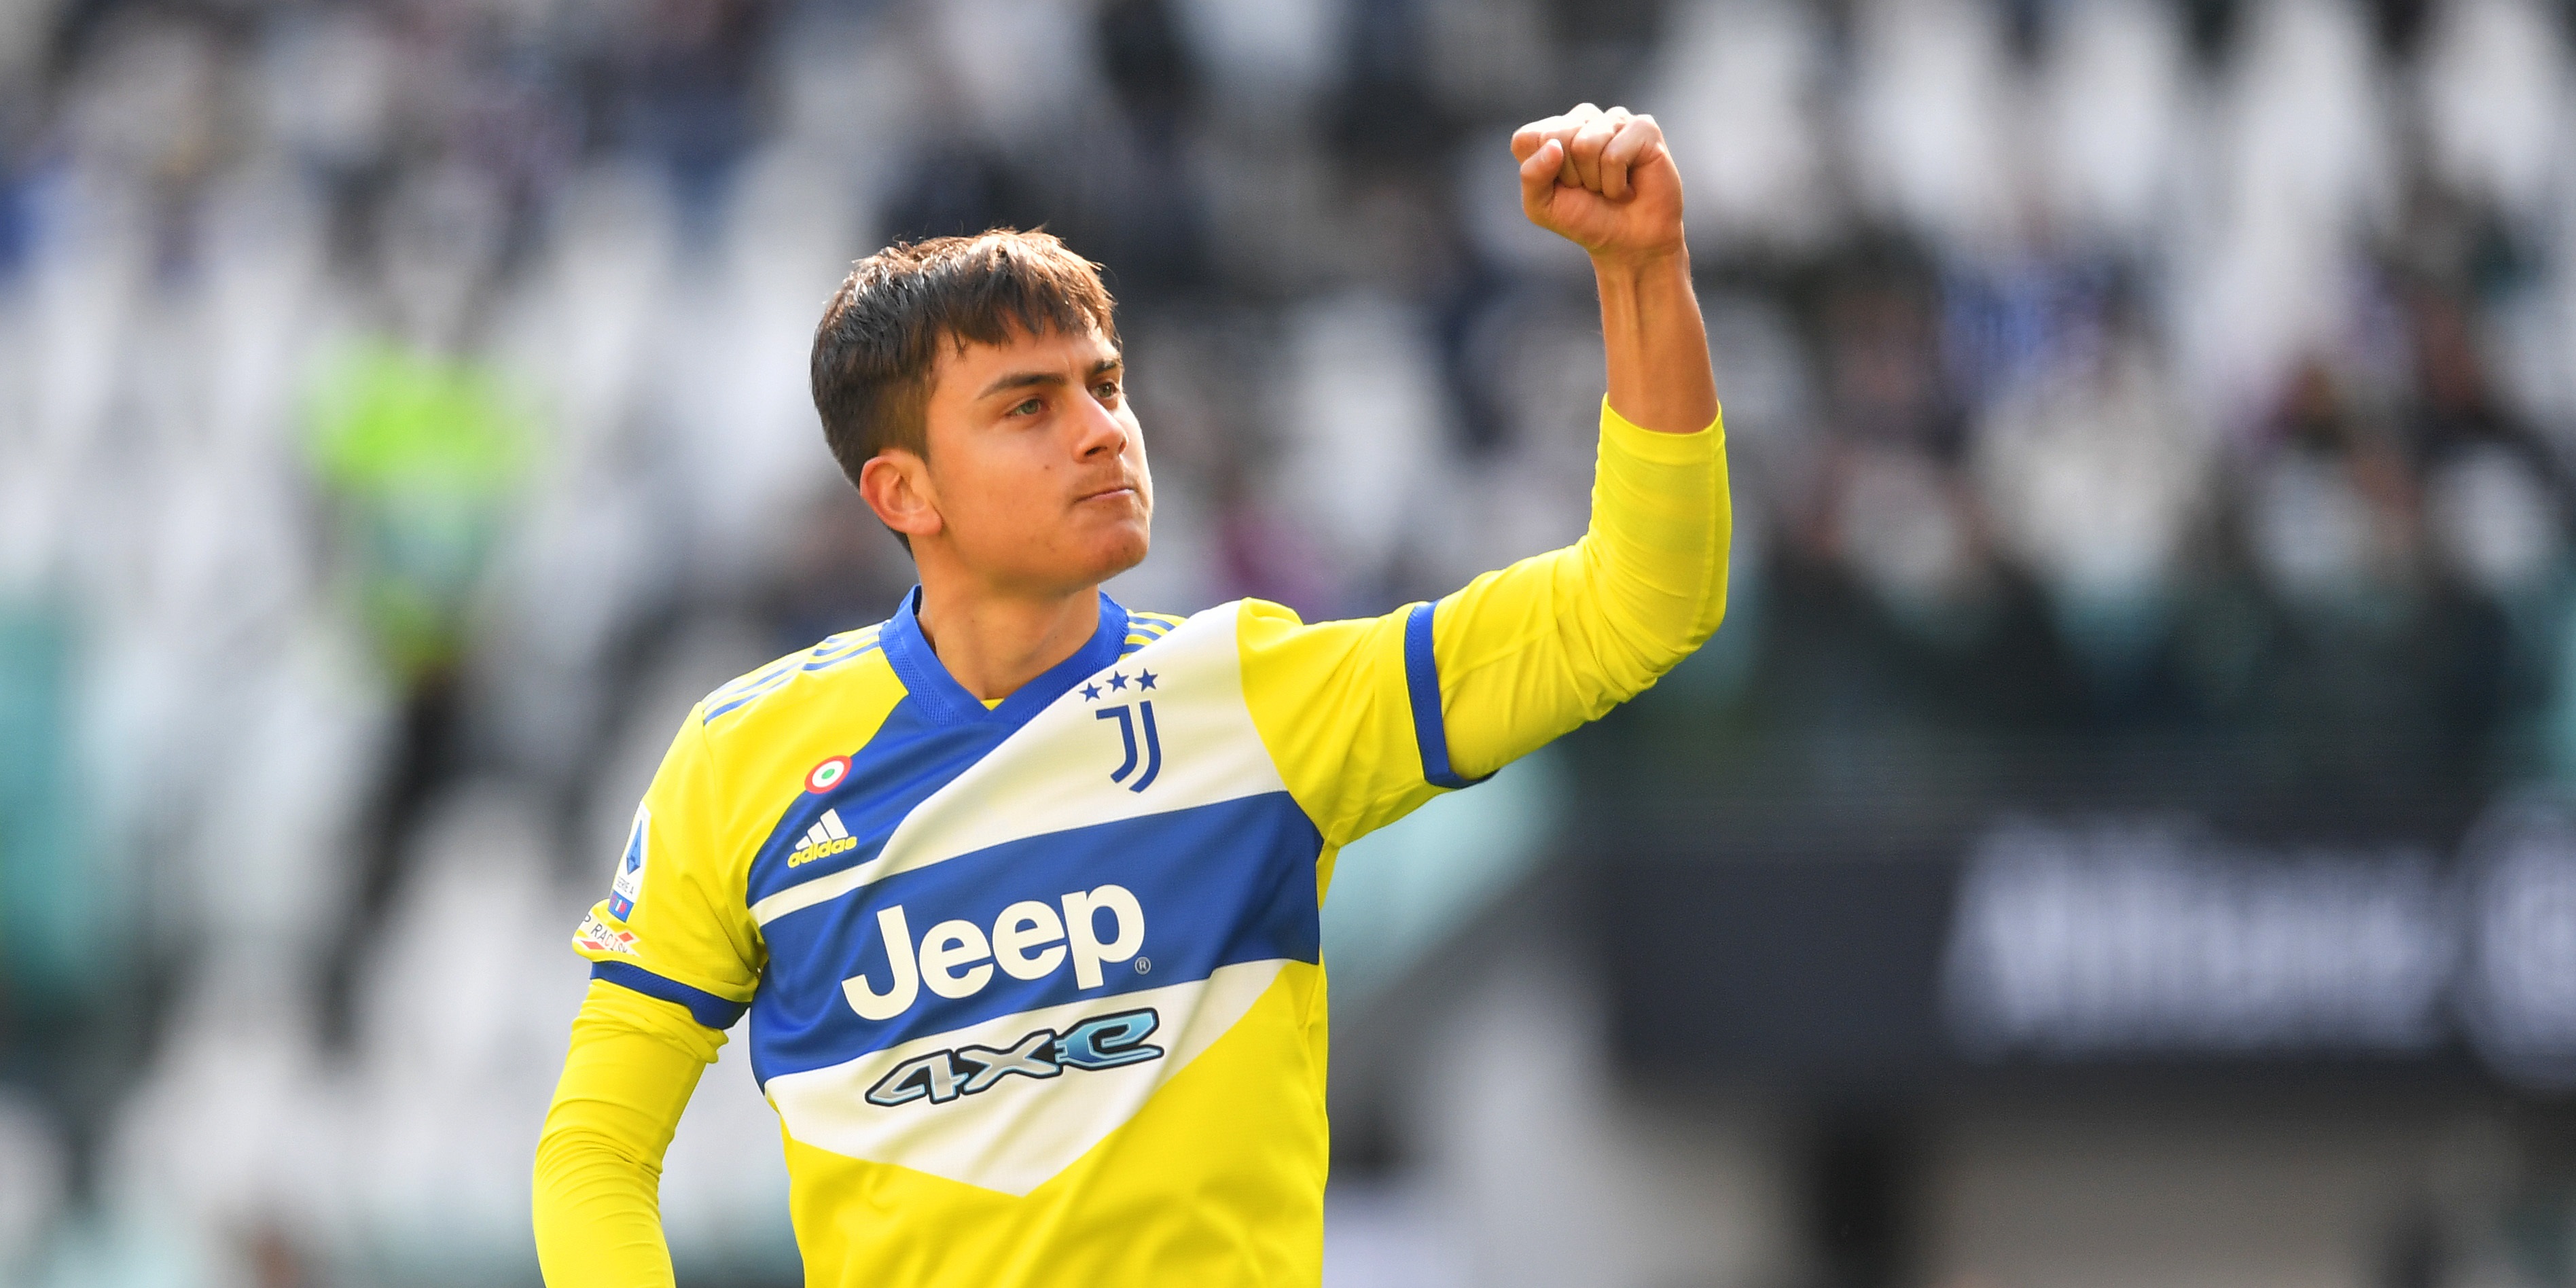 Juventus director weighs in on Paulo Dybala’s expiring contract amidst Liverpool links